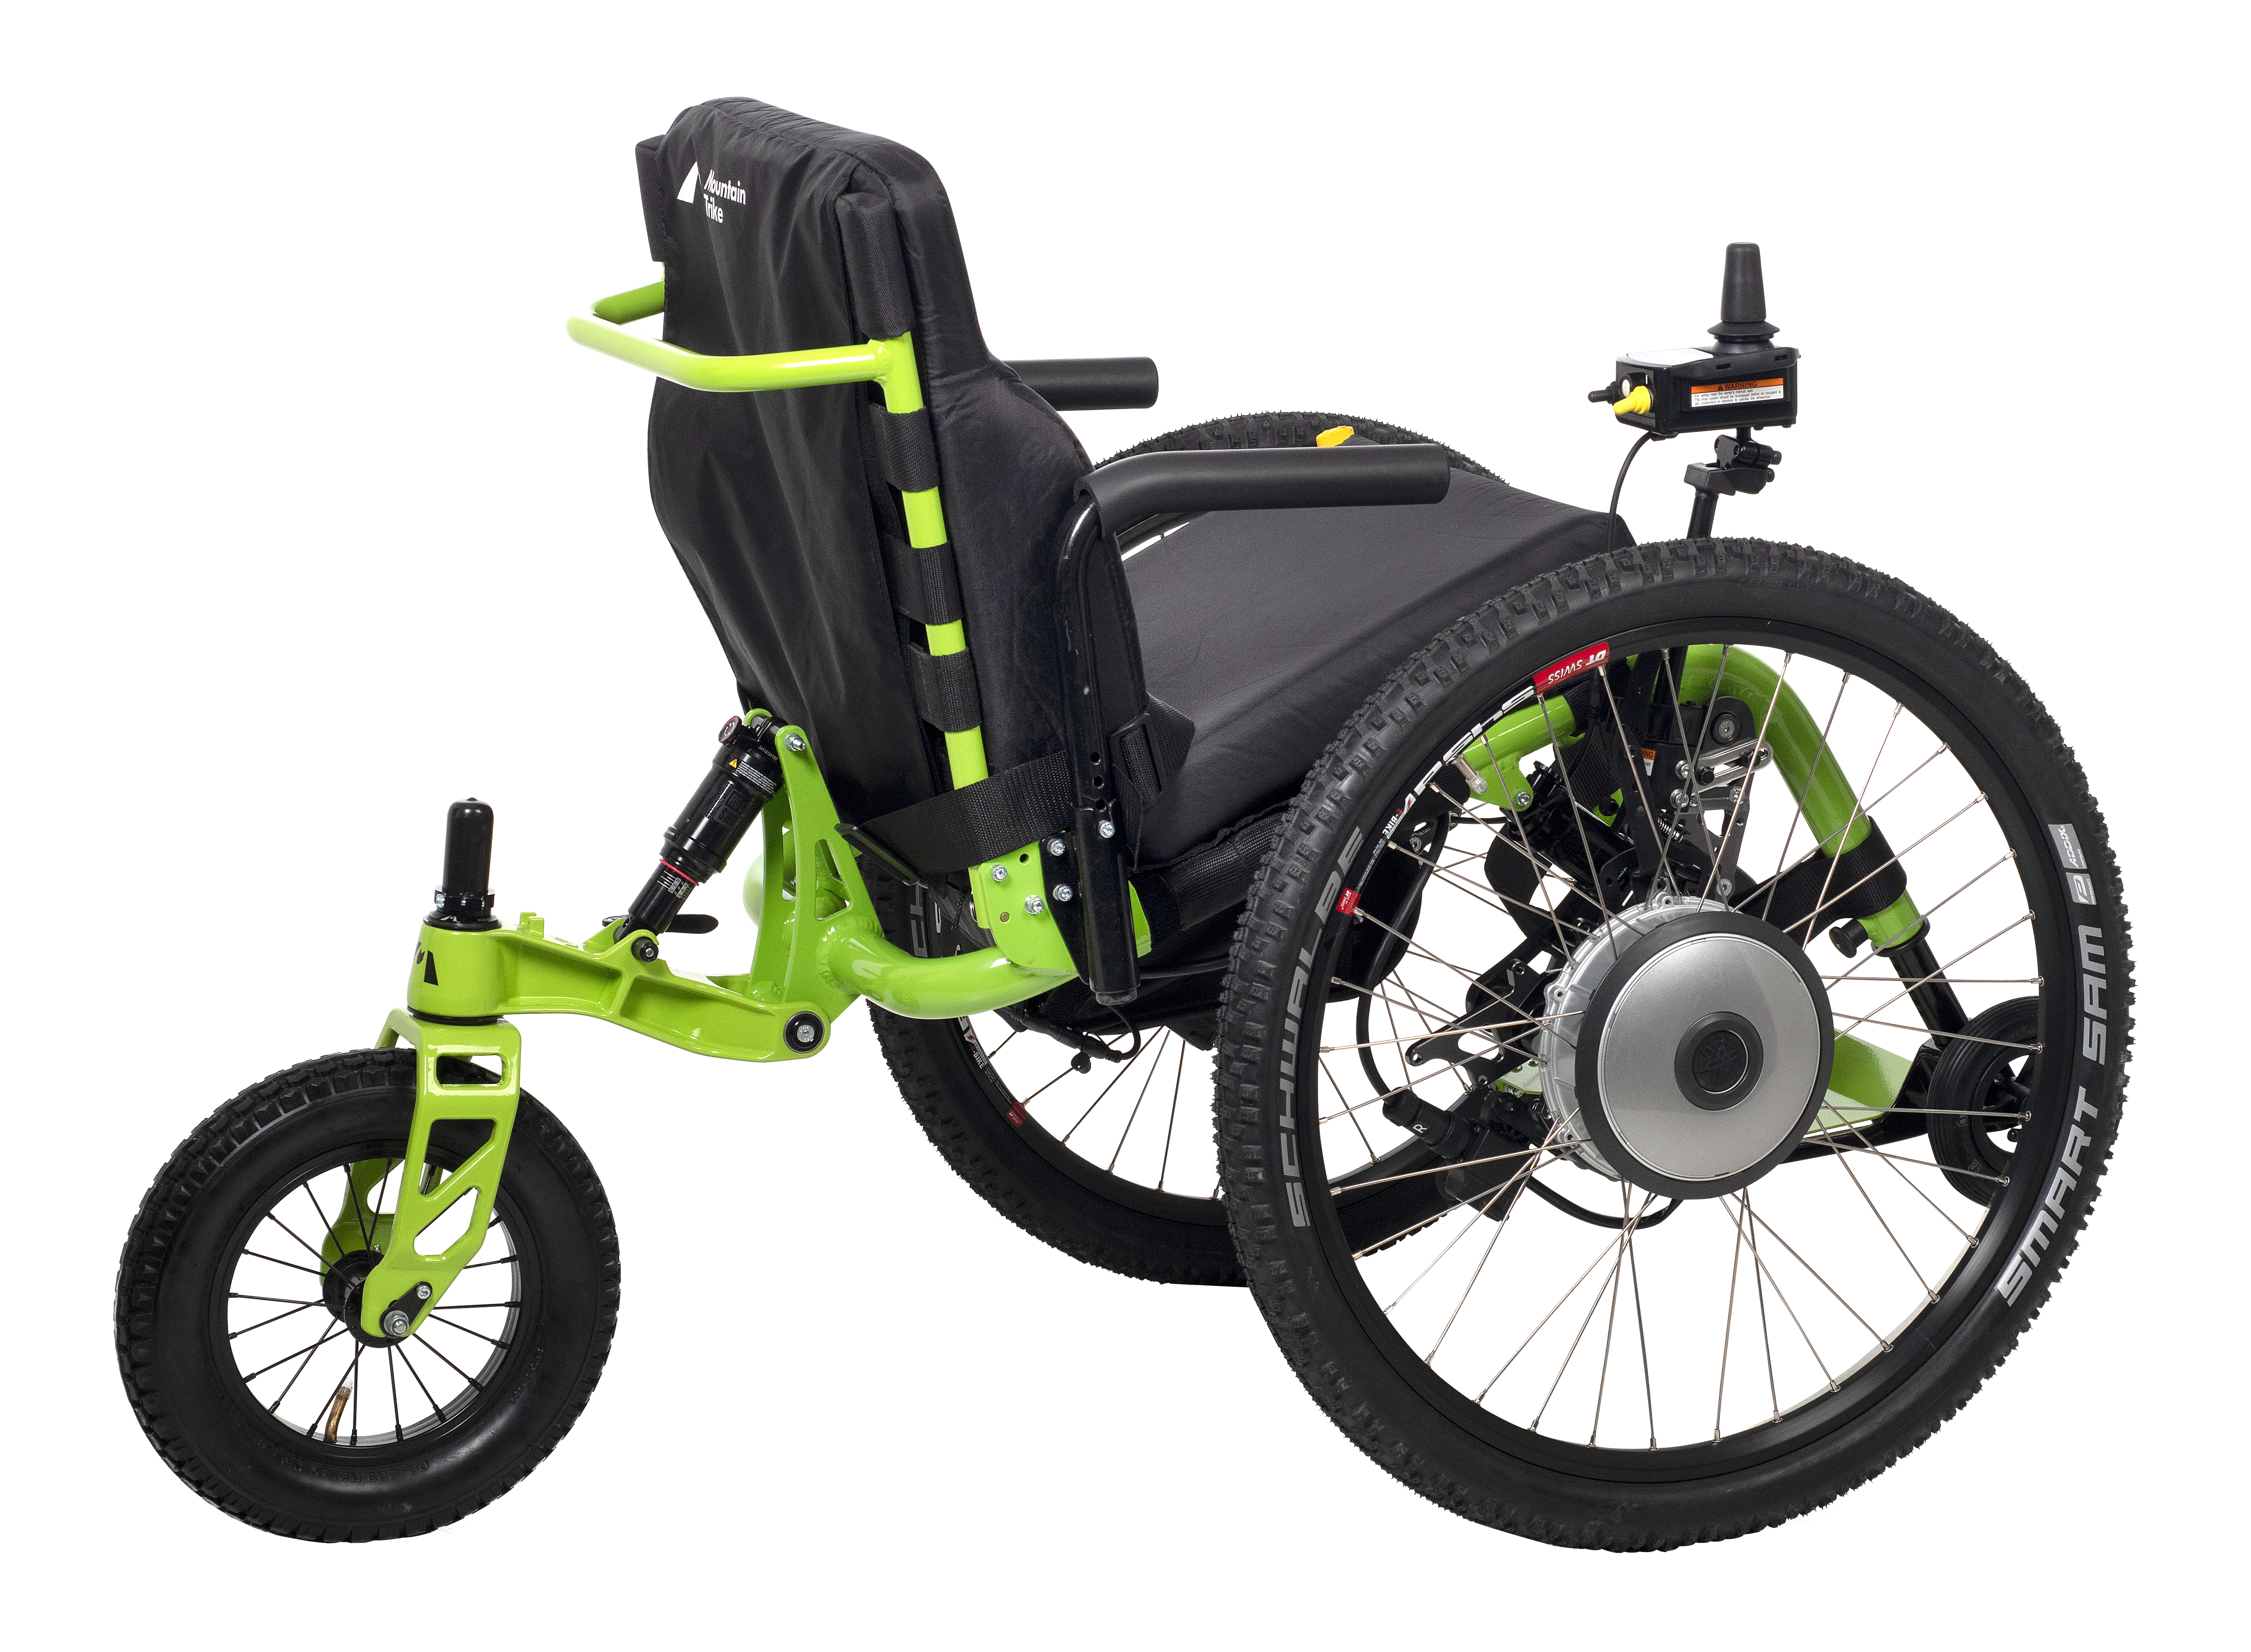 The SD Motion Trike Kit in association with Mountain Trike